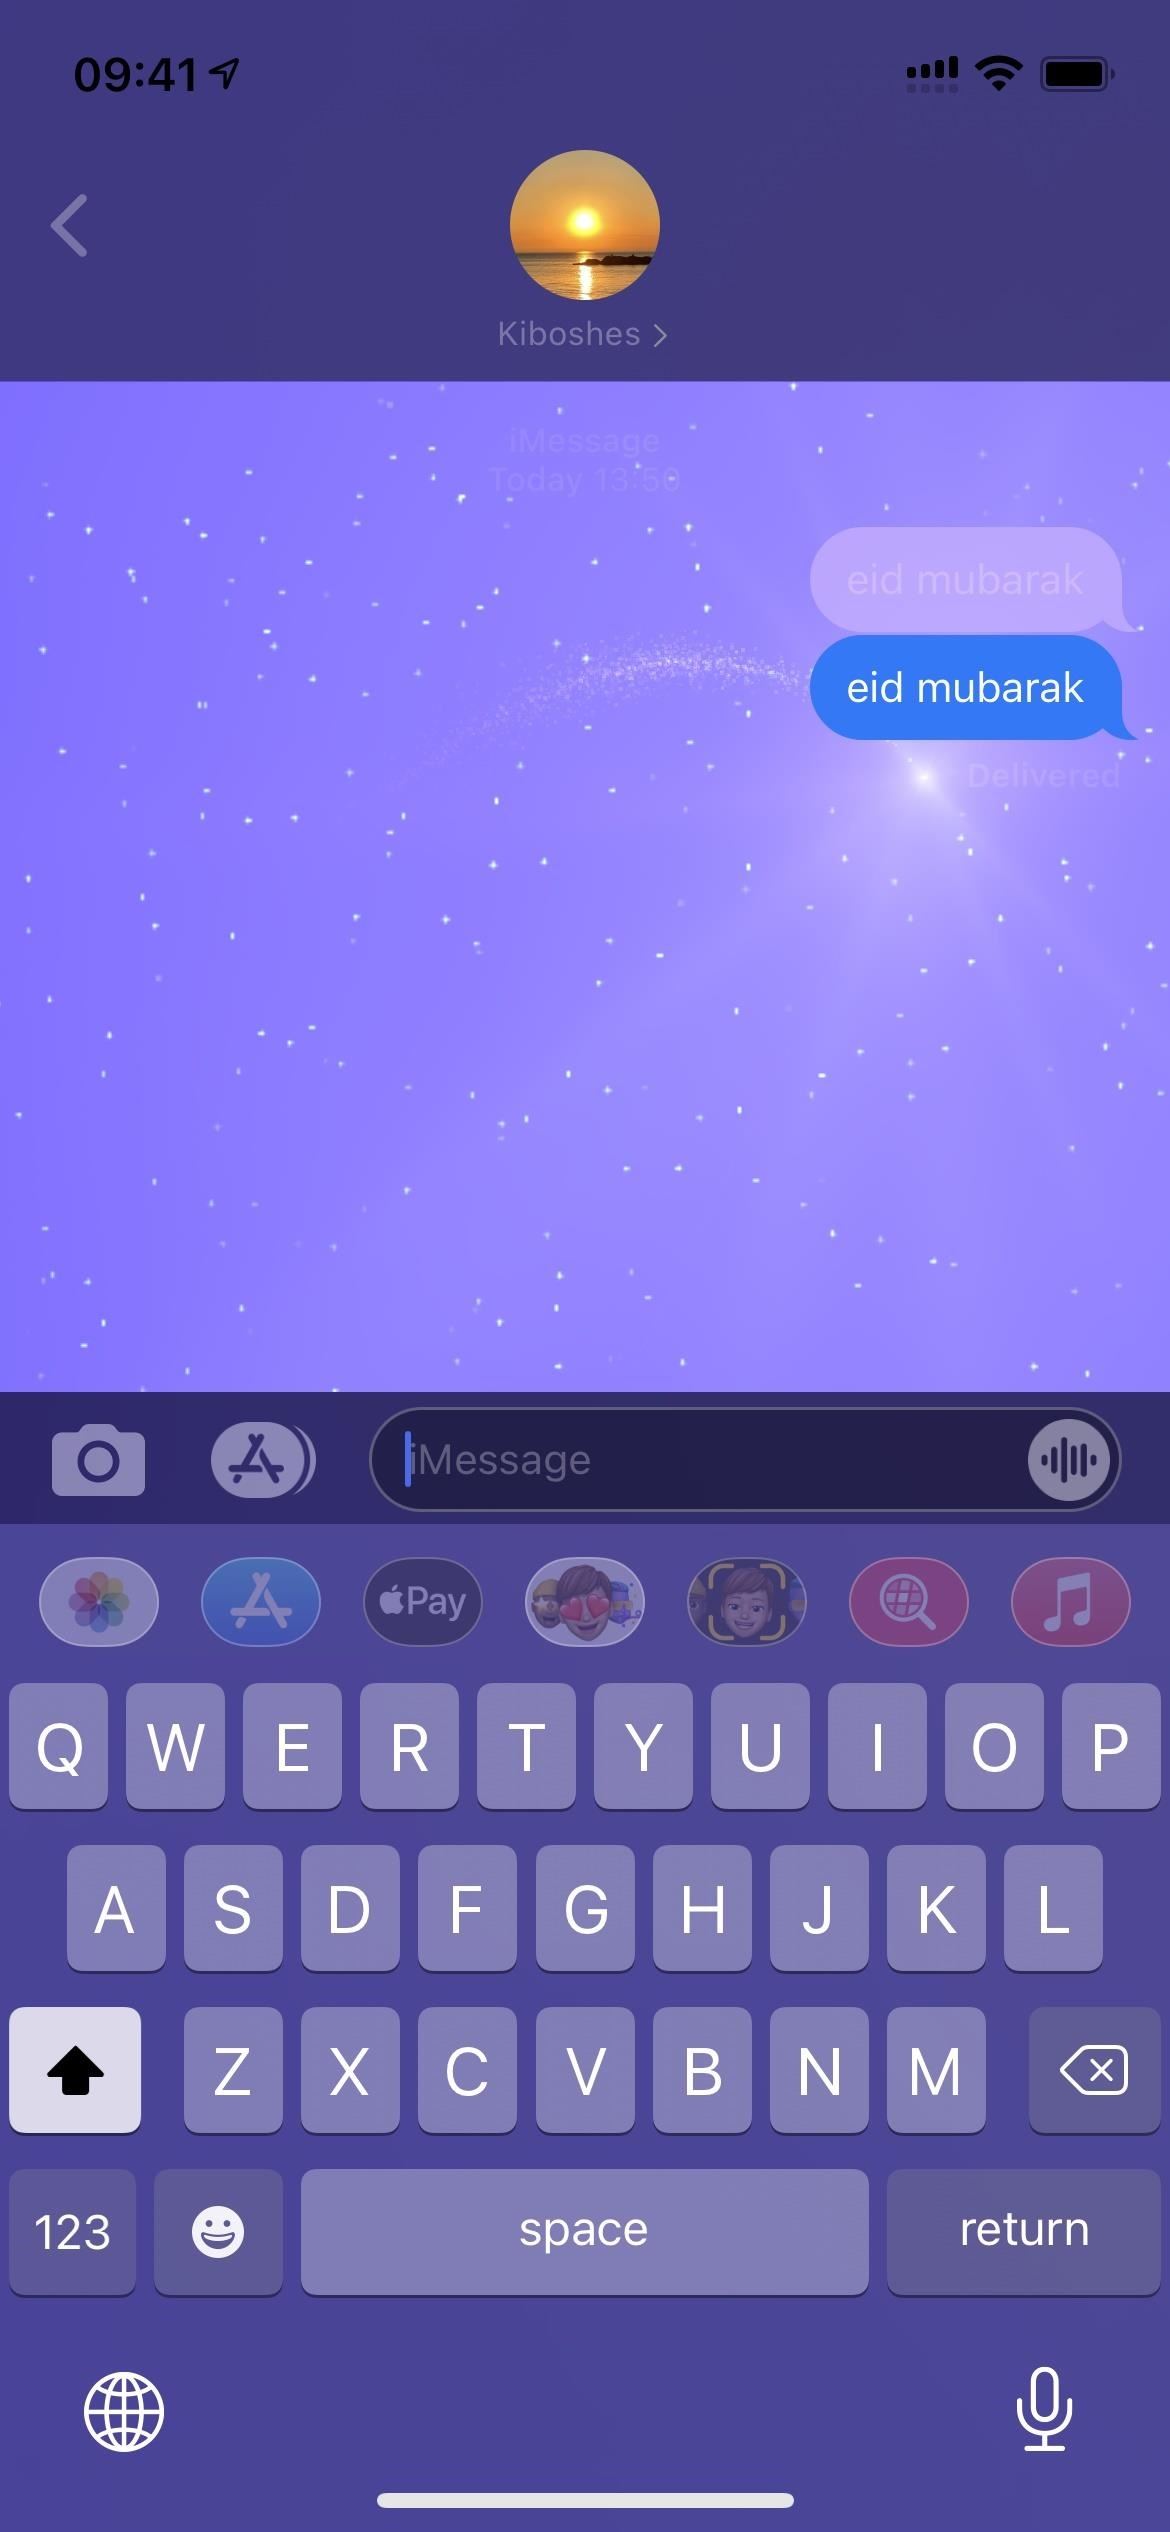 trigger imessage effects with just keyword.w1456